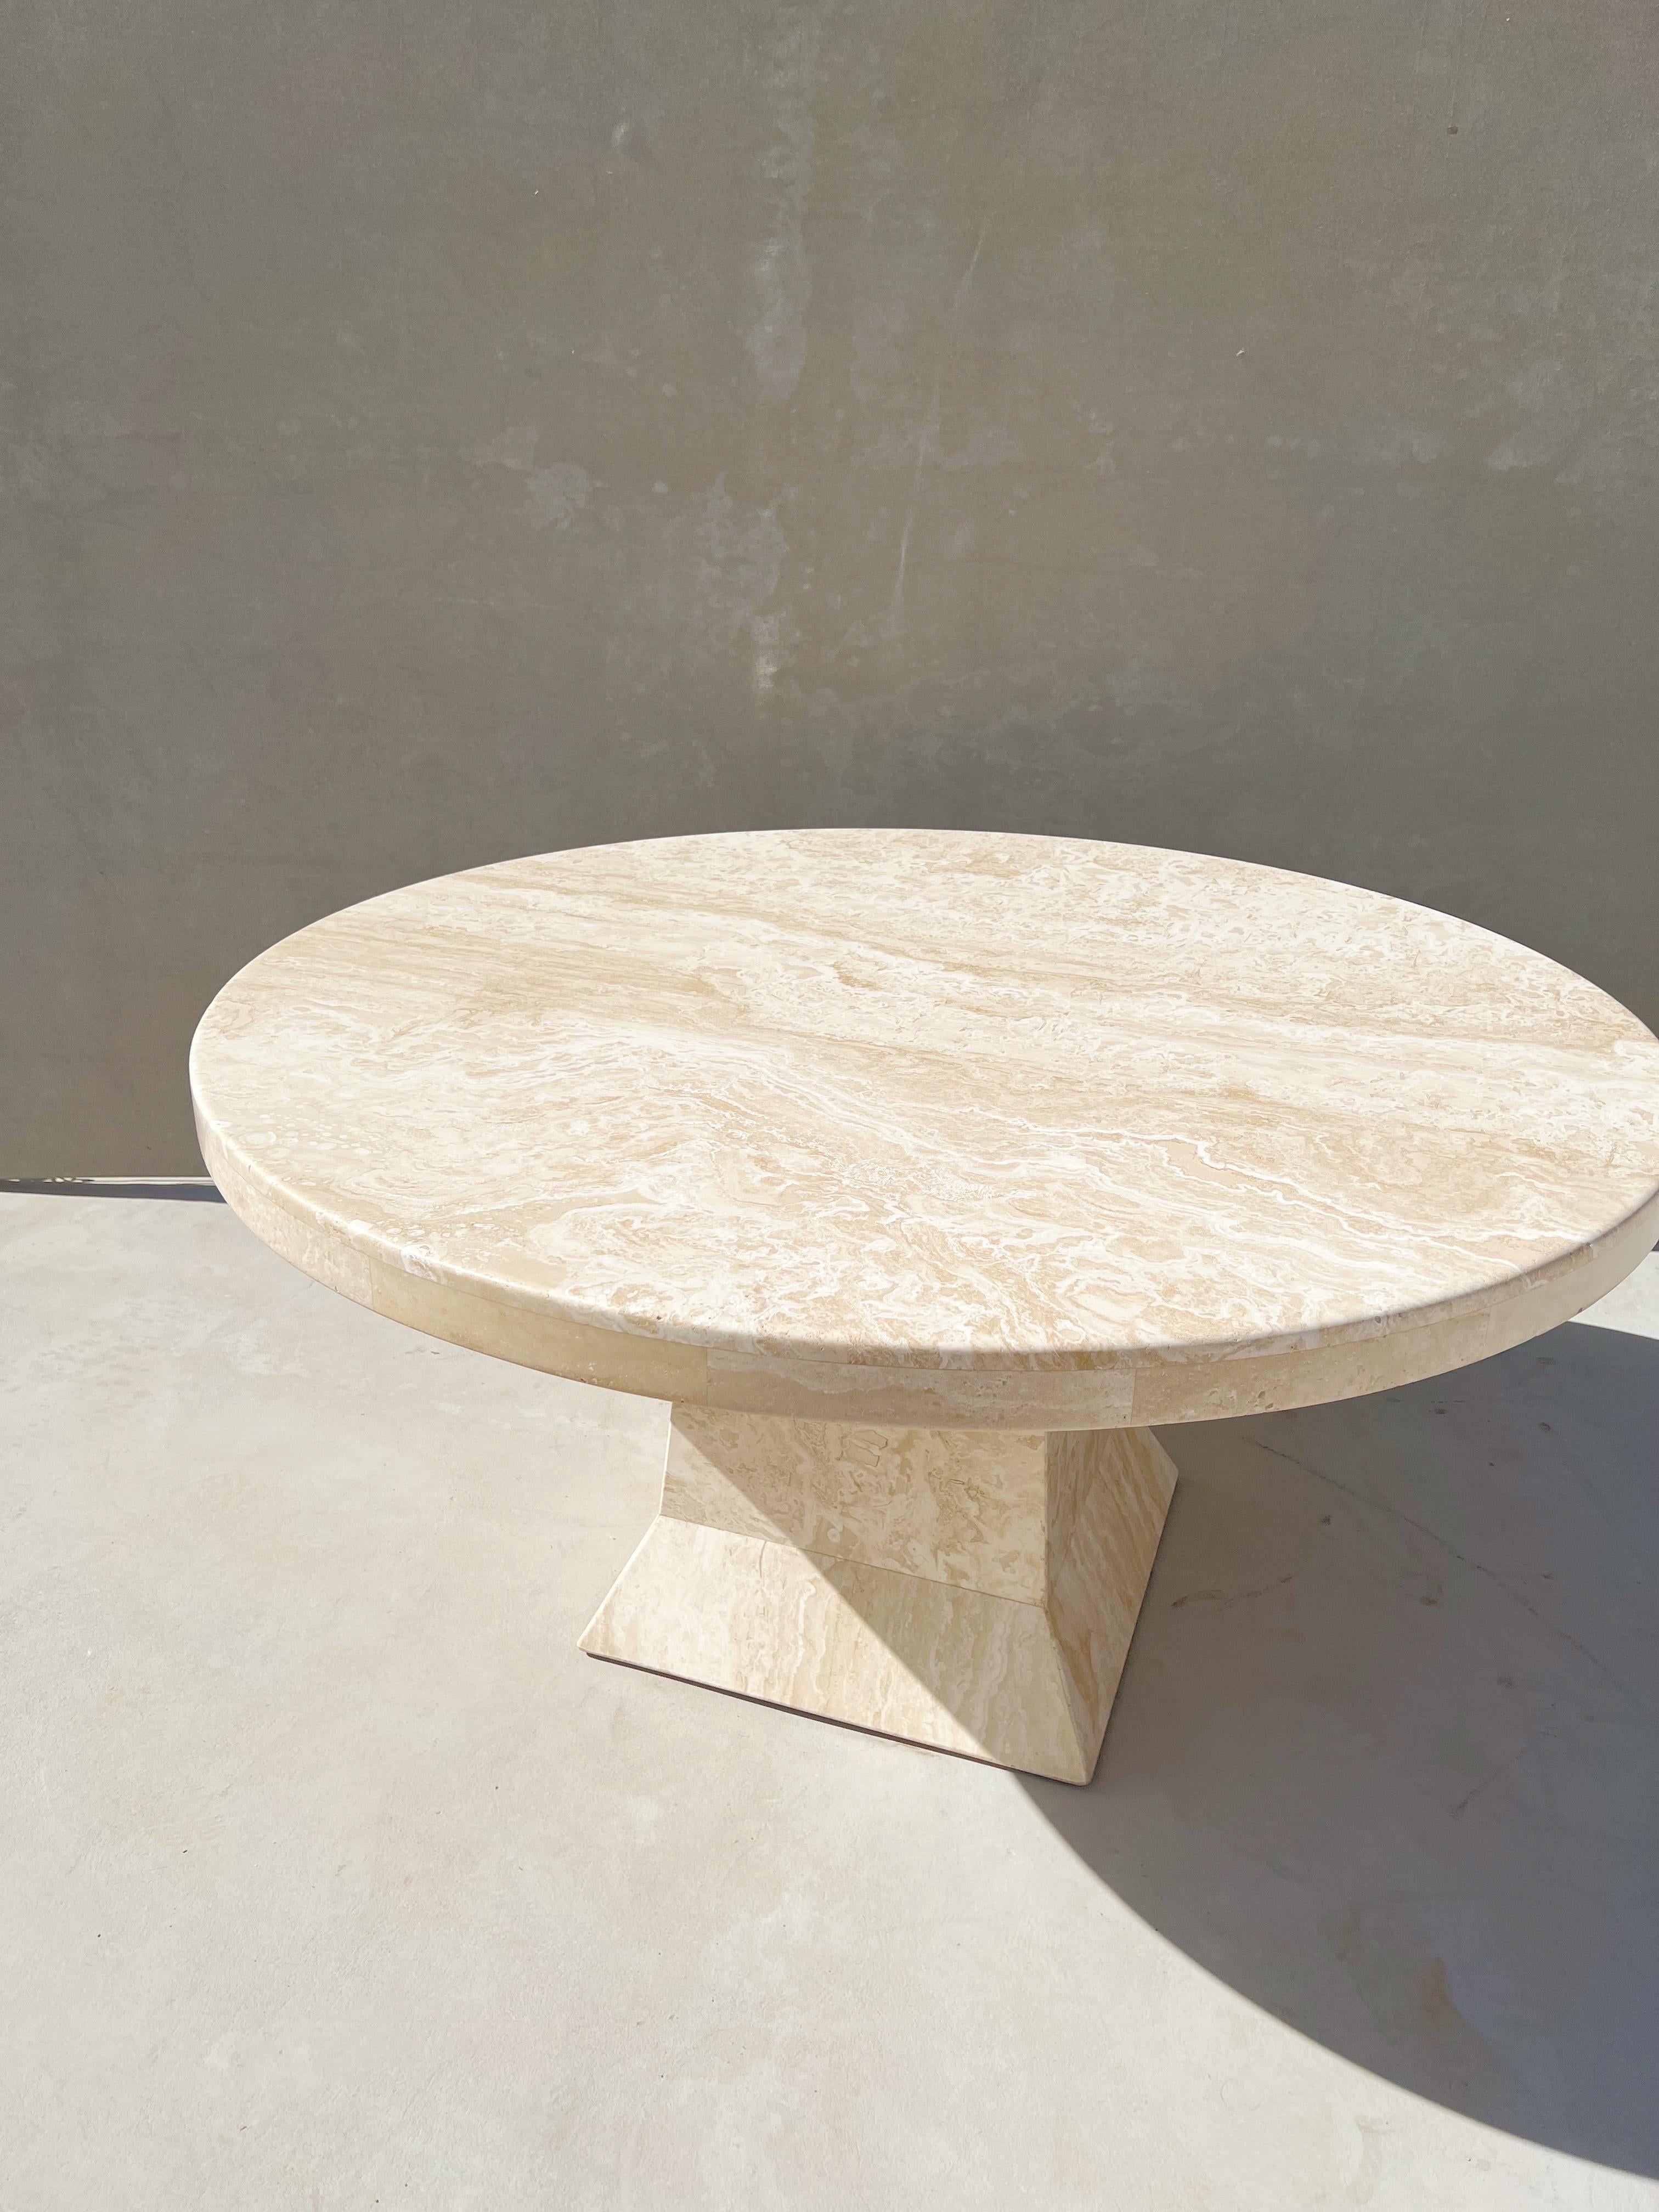 Vintage Modern Italian Travertine Round Dining Table with a Sculptural Base 12